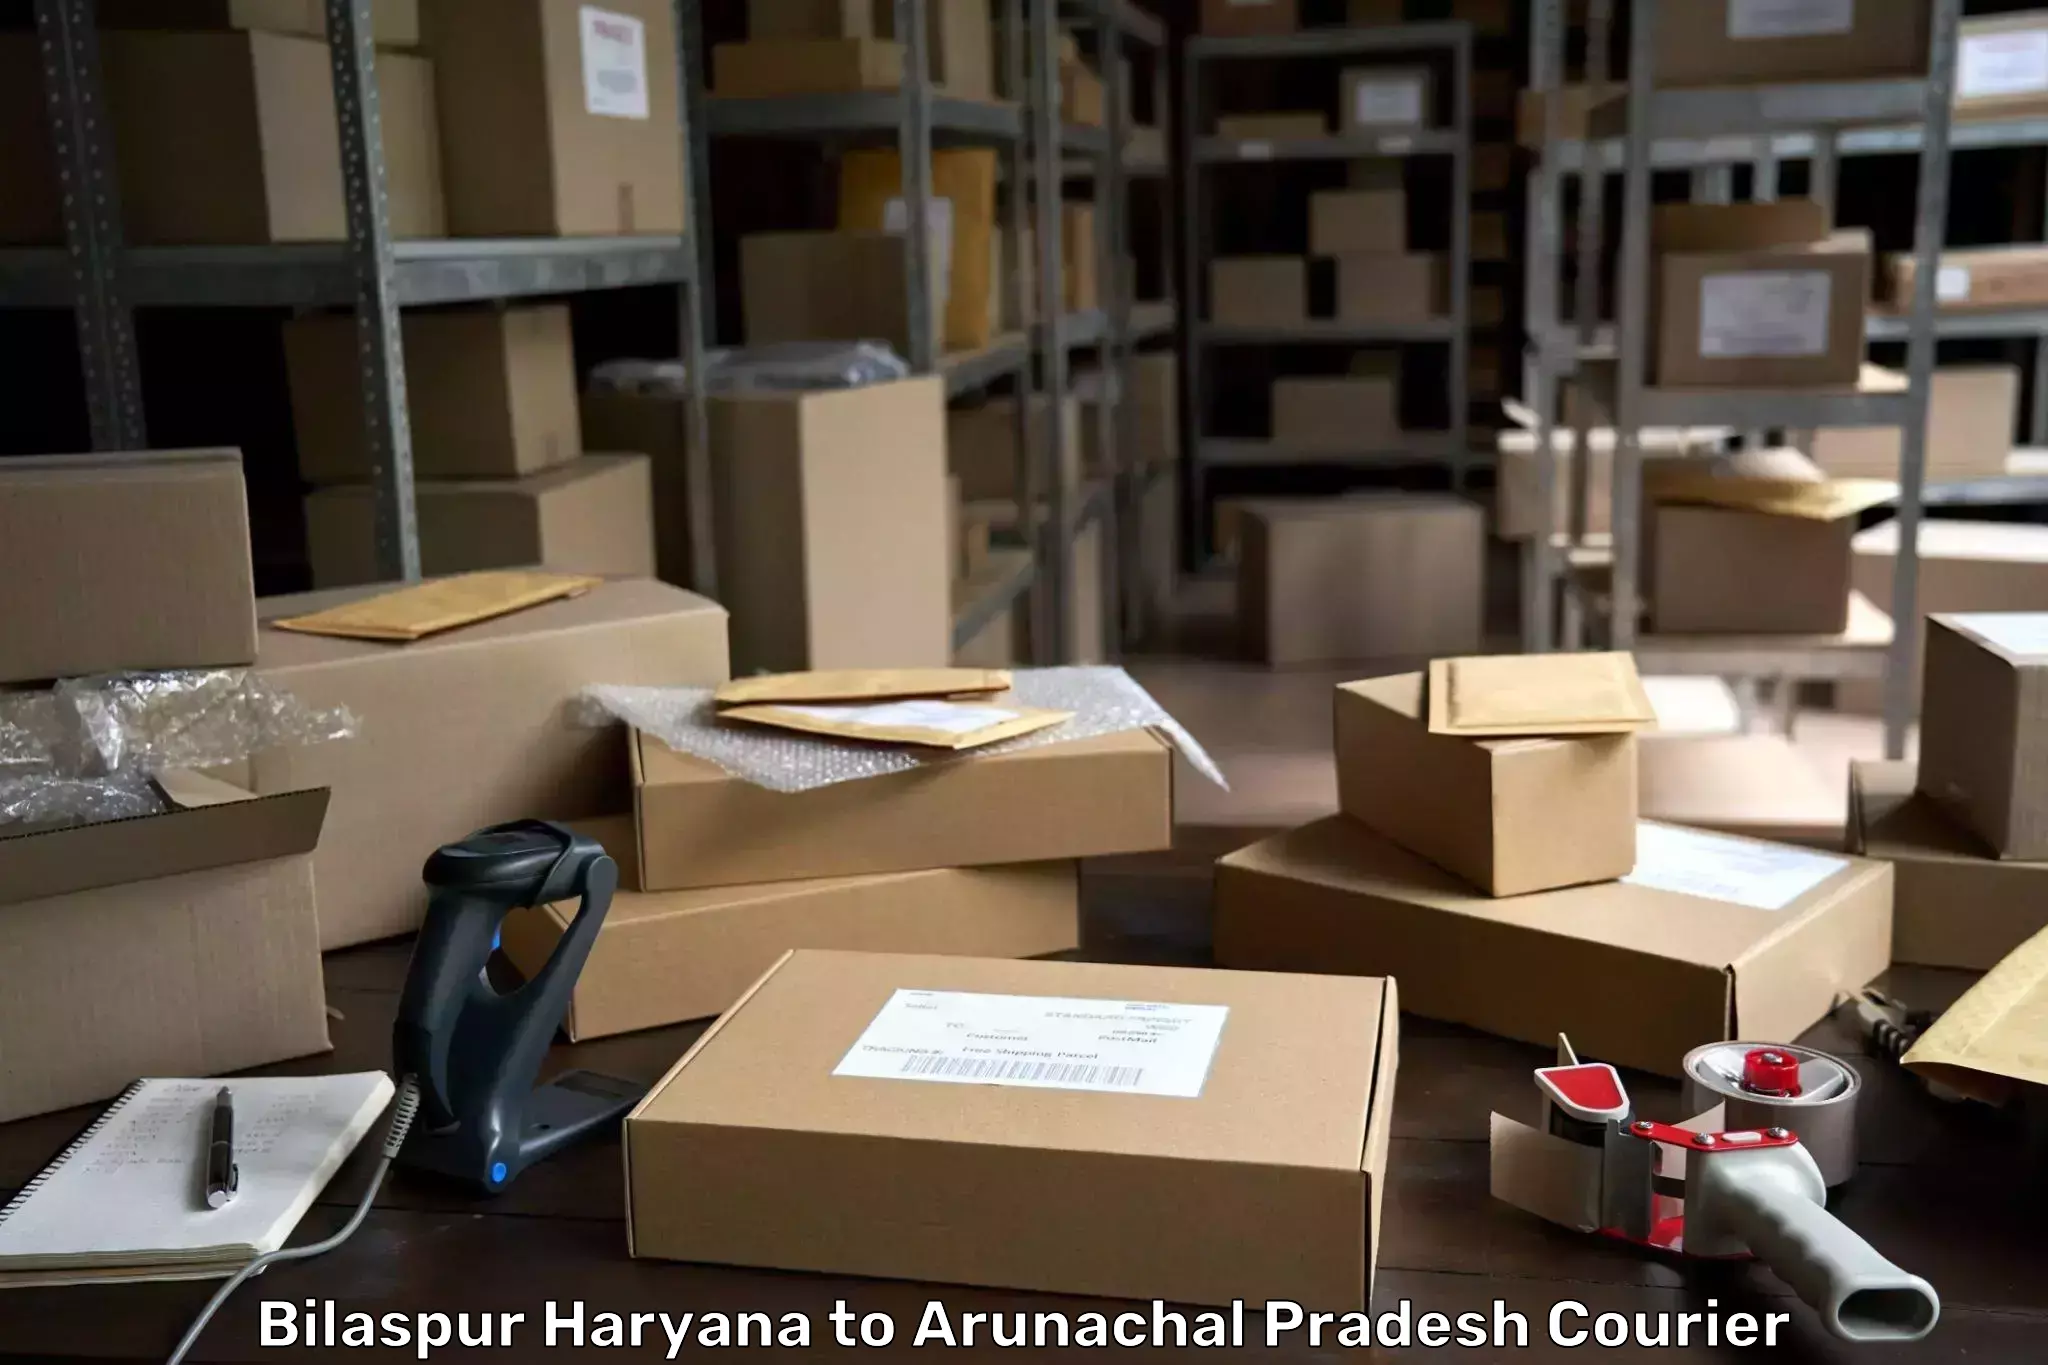 State-of-the-art courier technology Bilaspur Haryana to Yingkiong